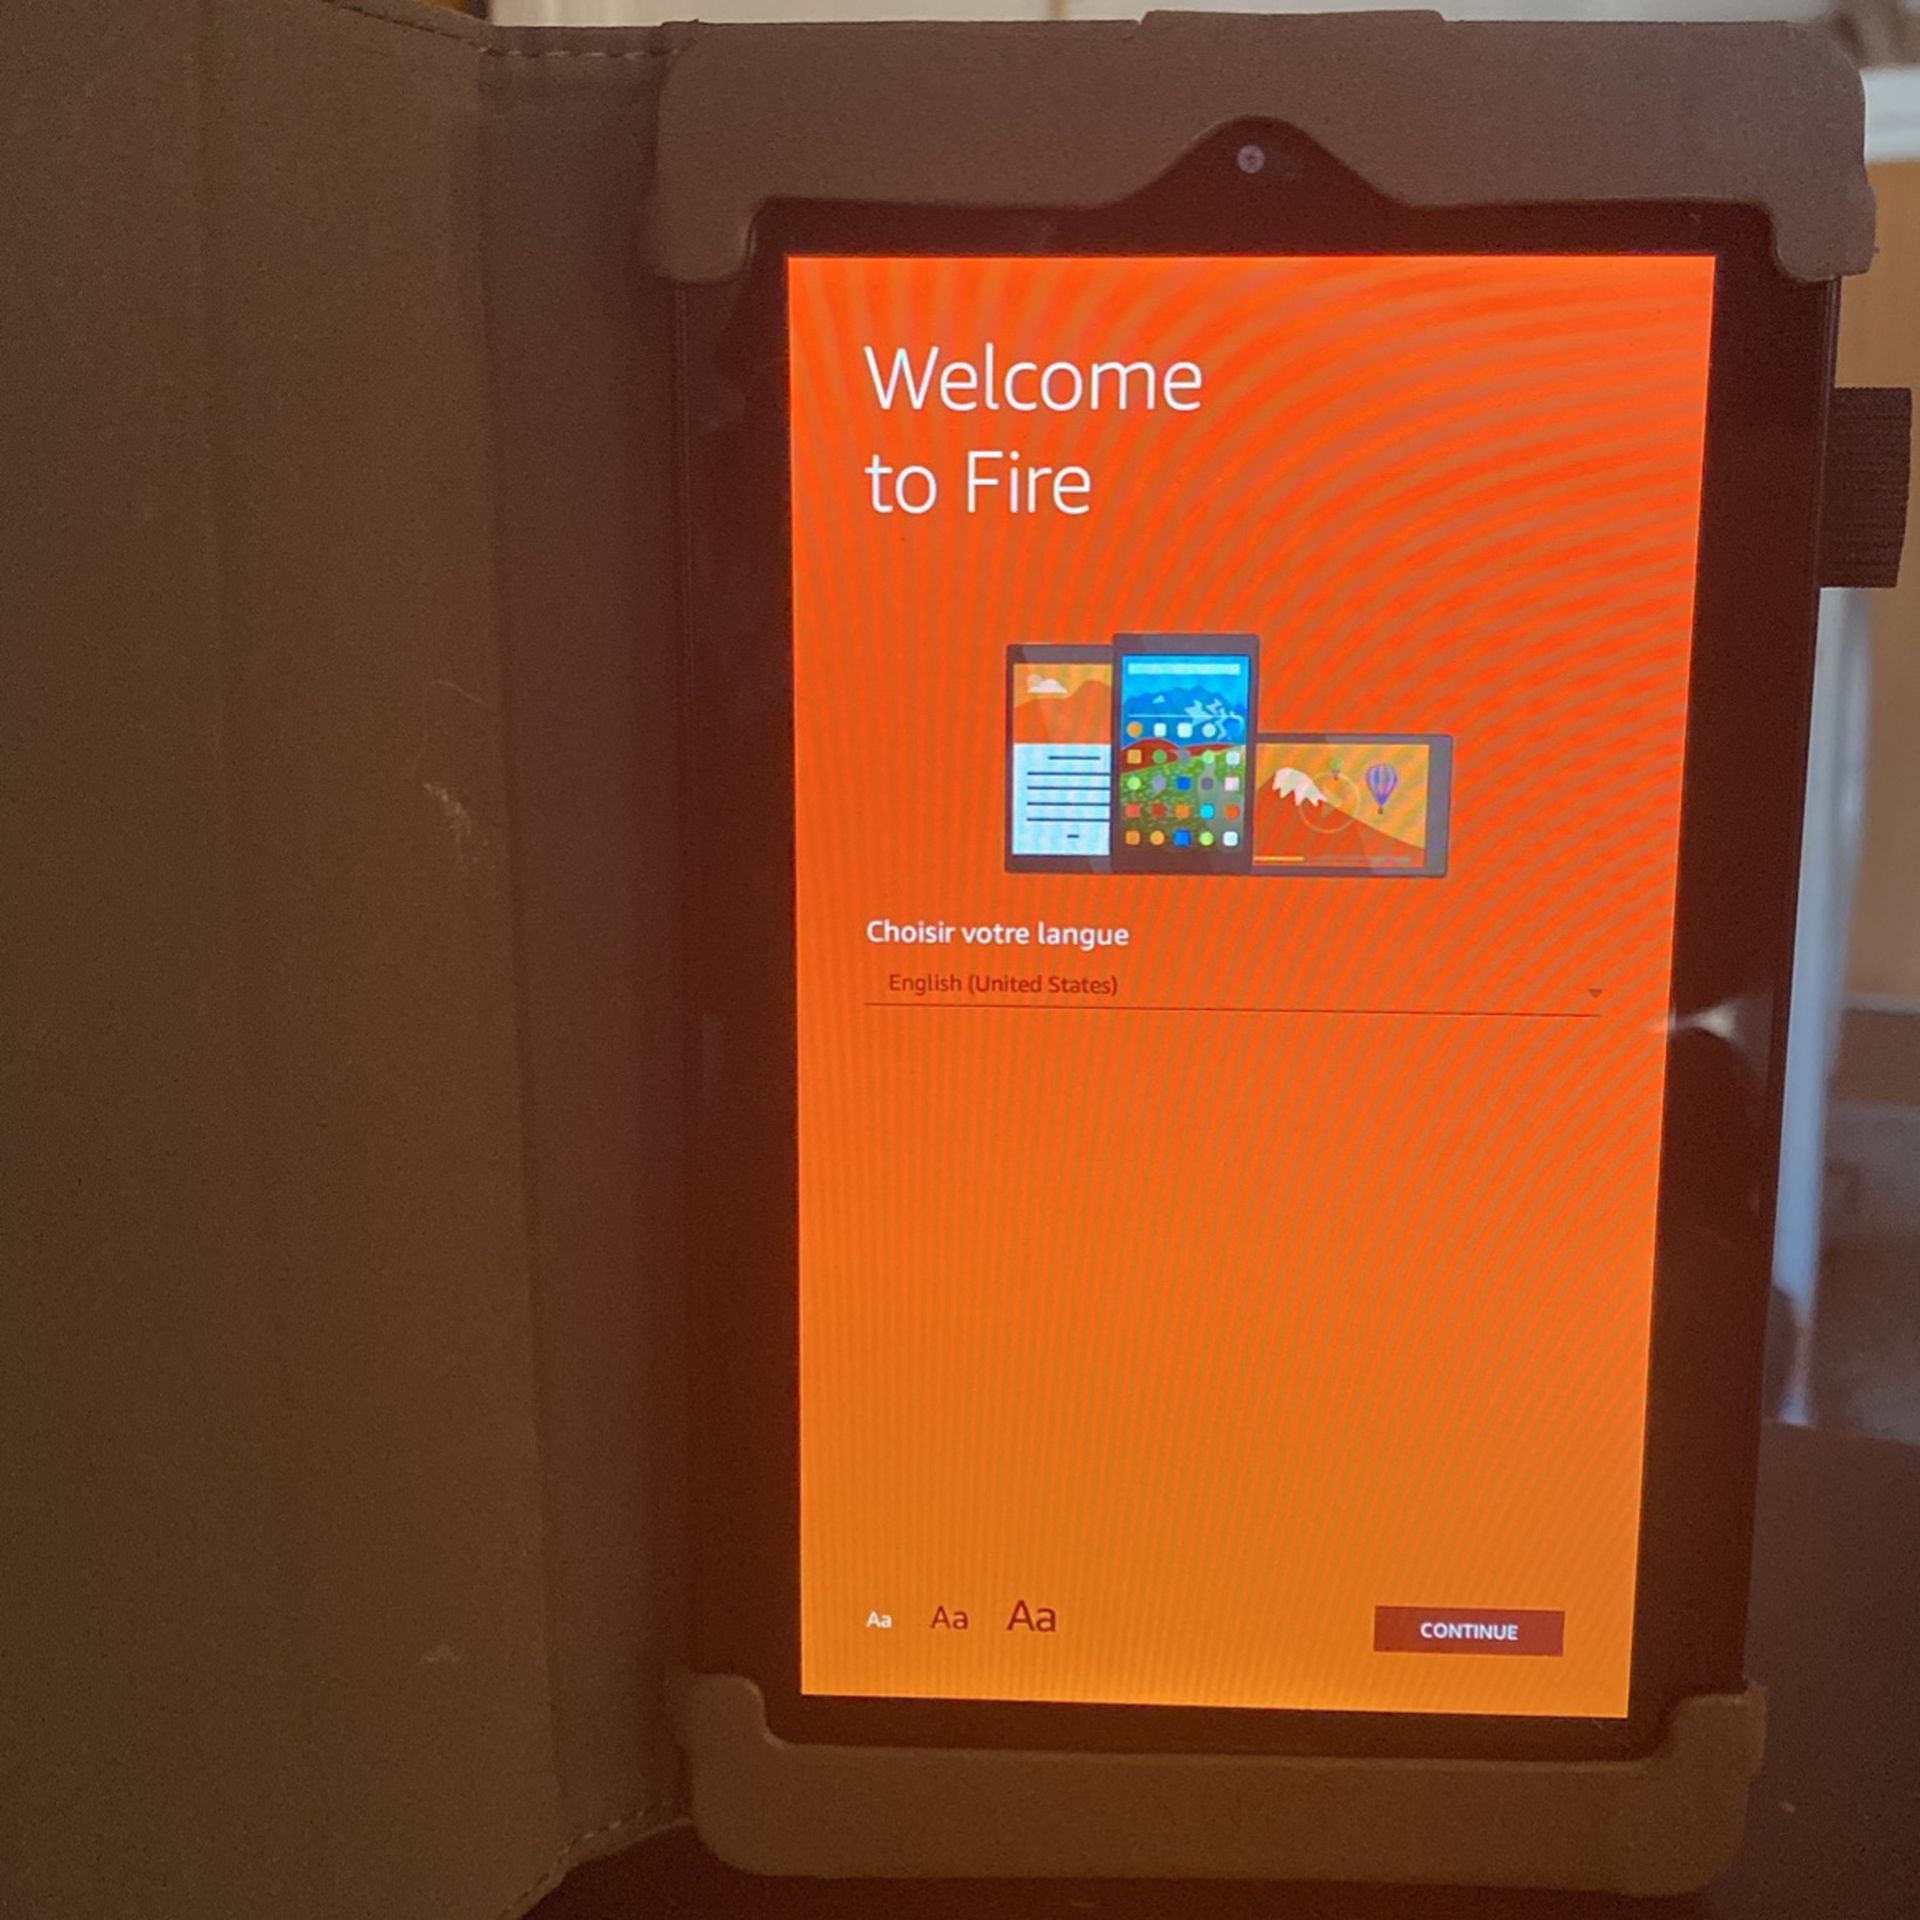 Amazon Fire 7 Tablet (7th Generation)